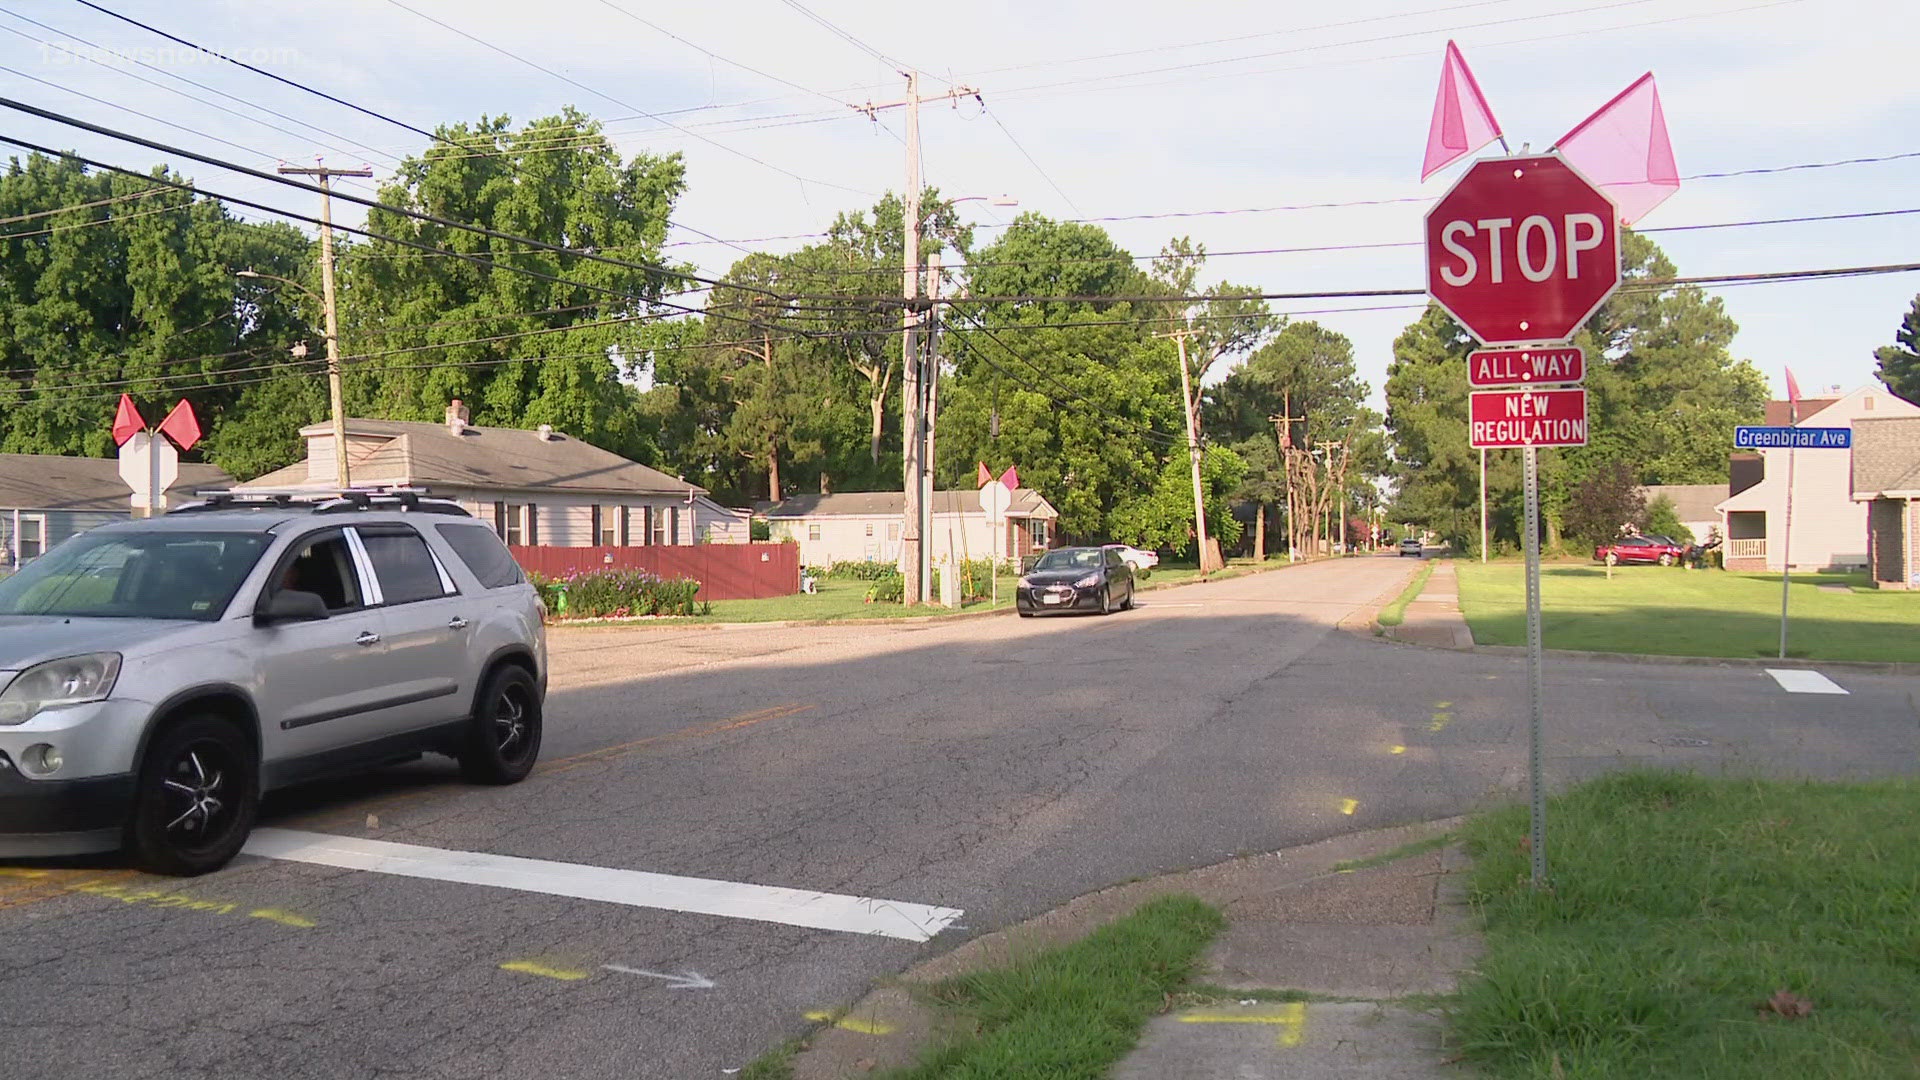 Frequent speeders are causing frustration in one Hampton neighborhood.